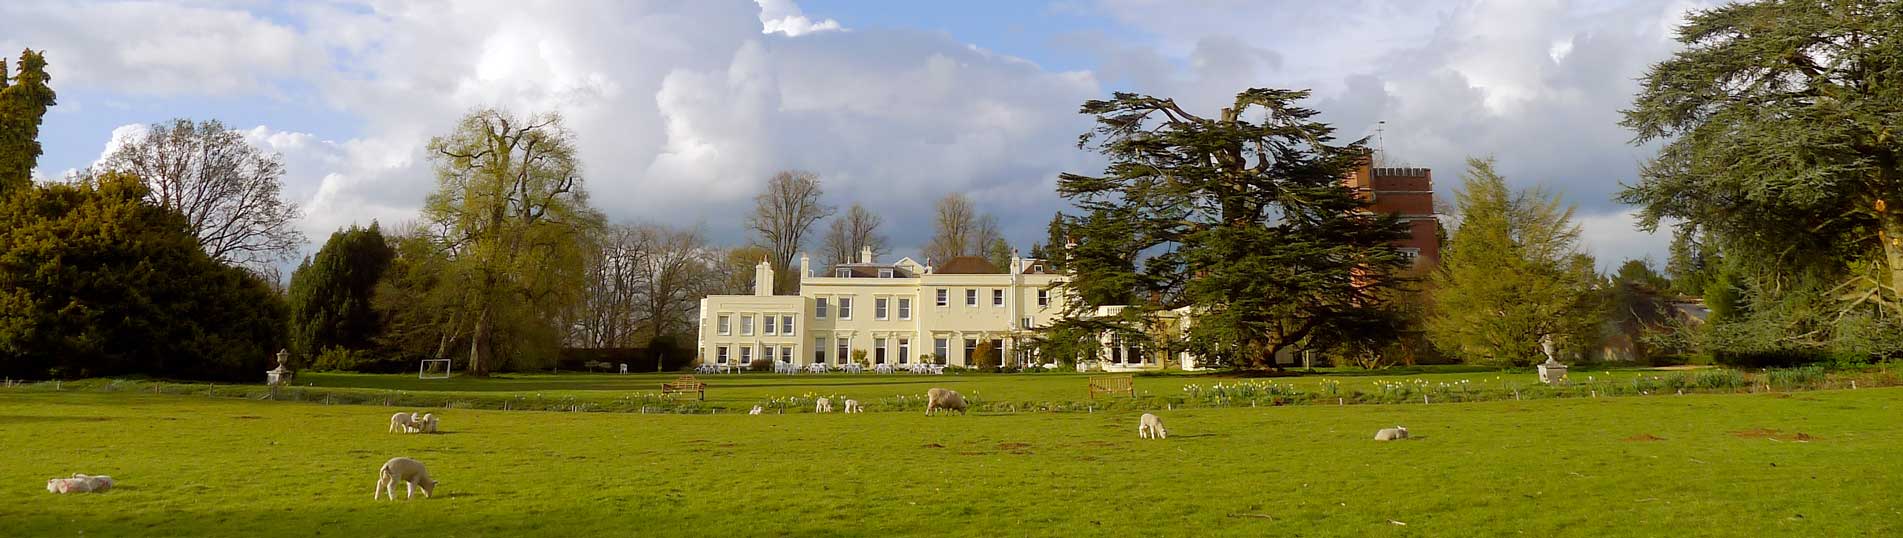 View of Brockwood Park School from the south lawn